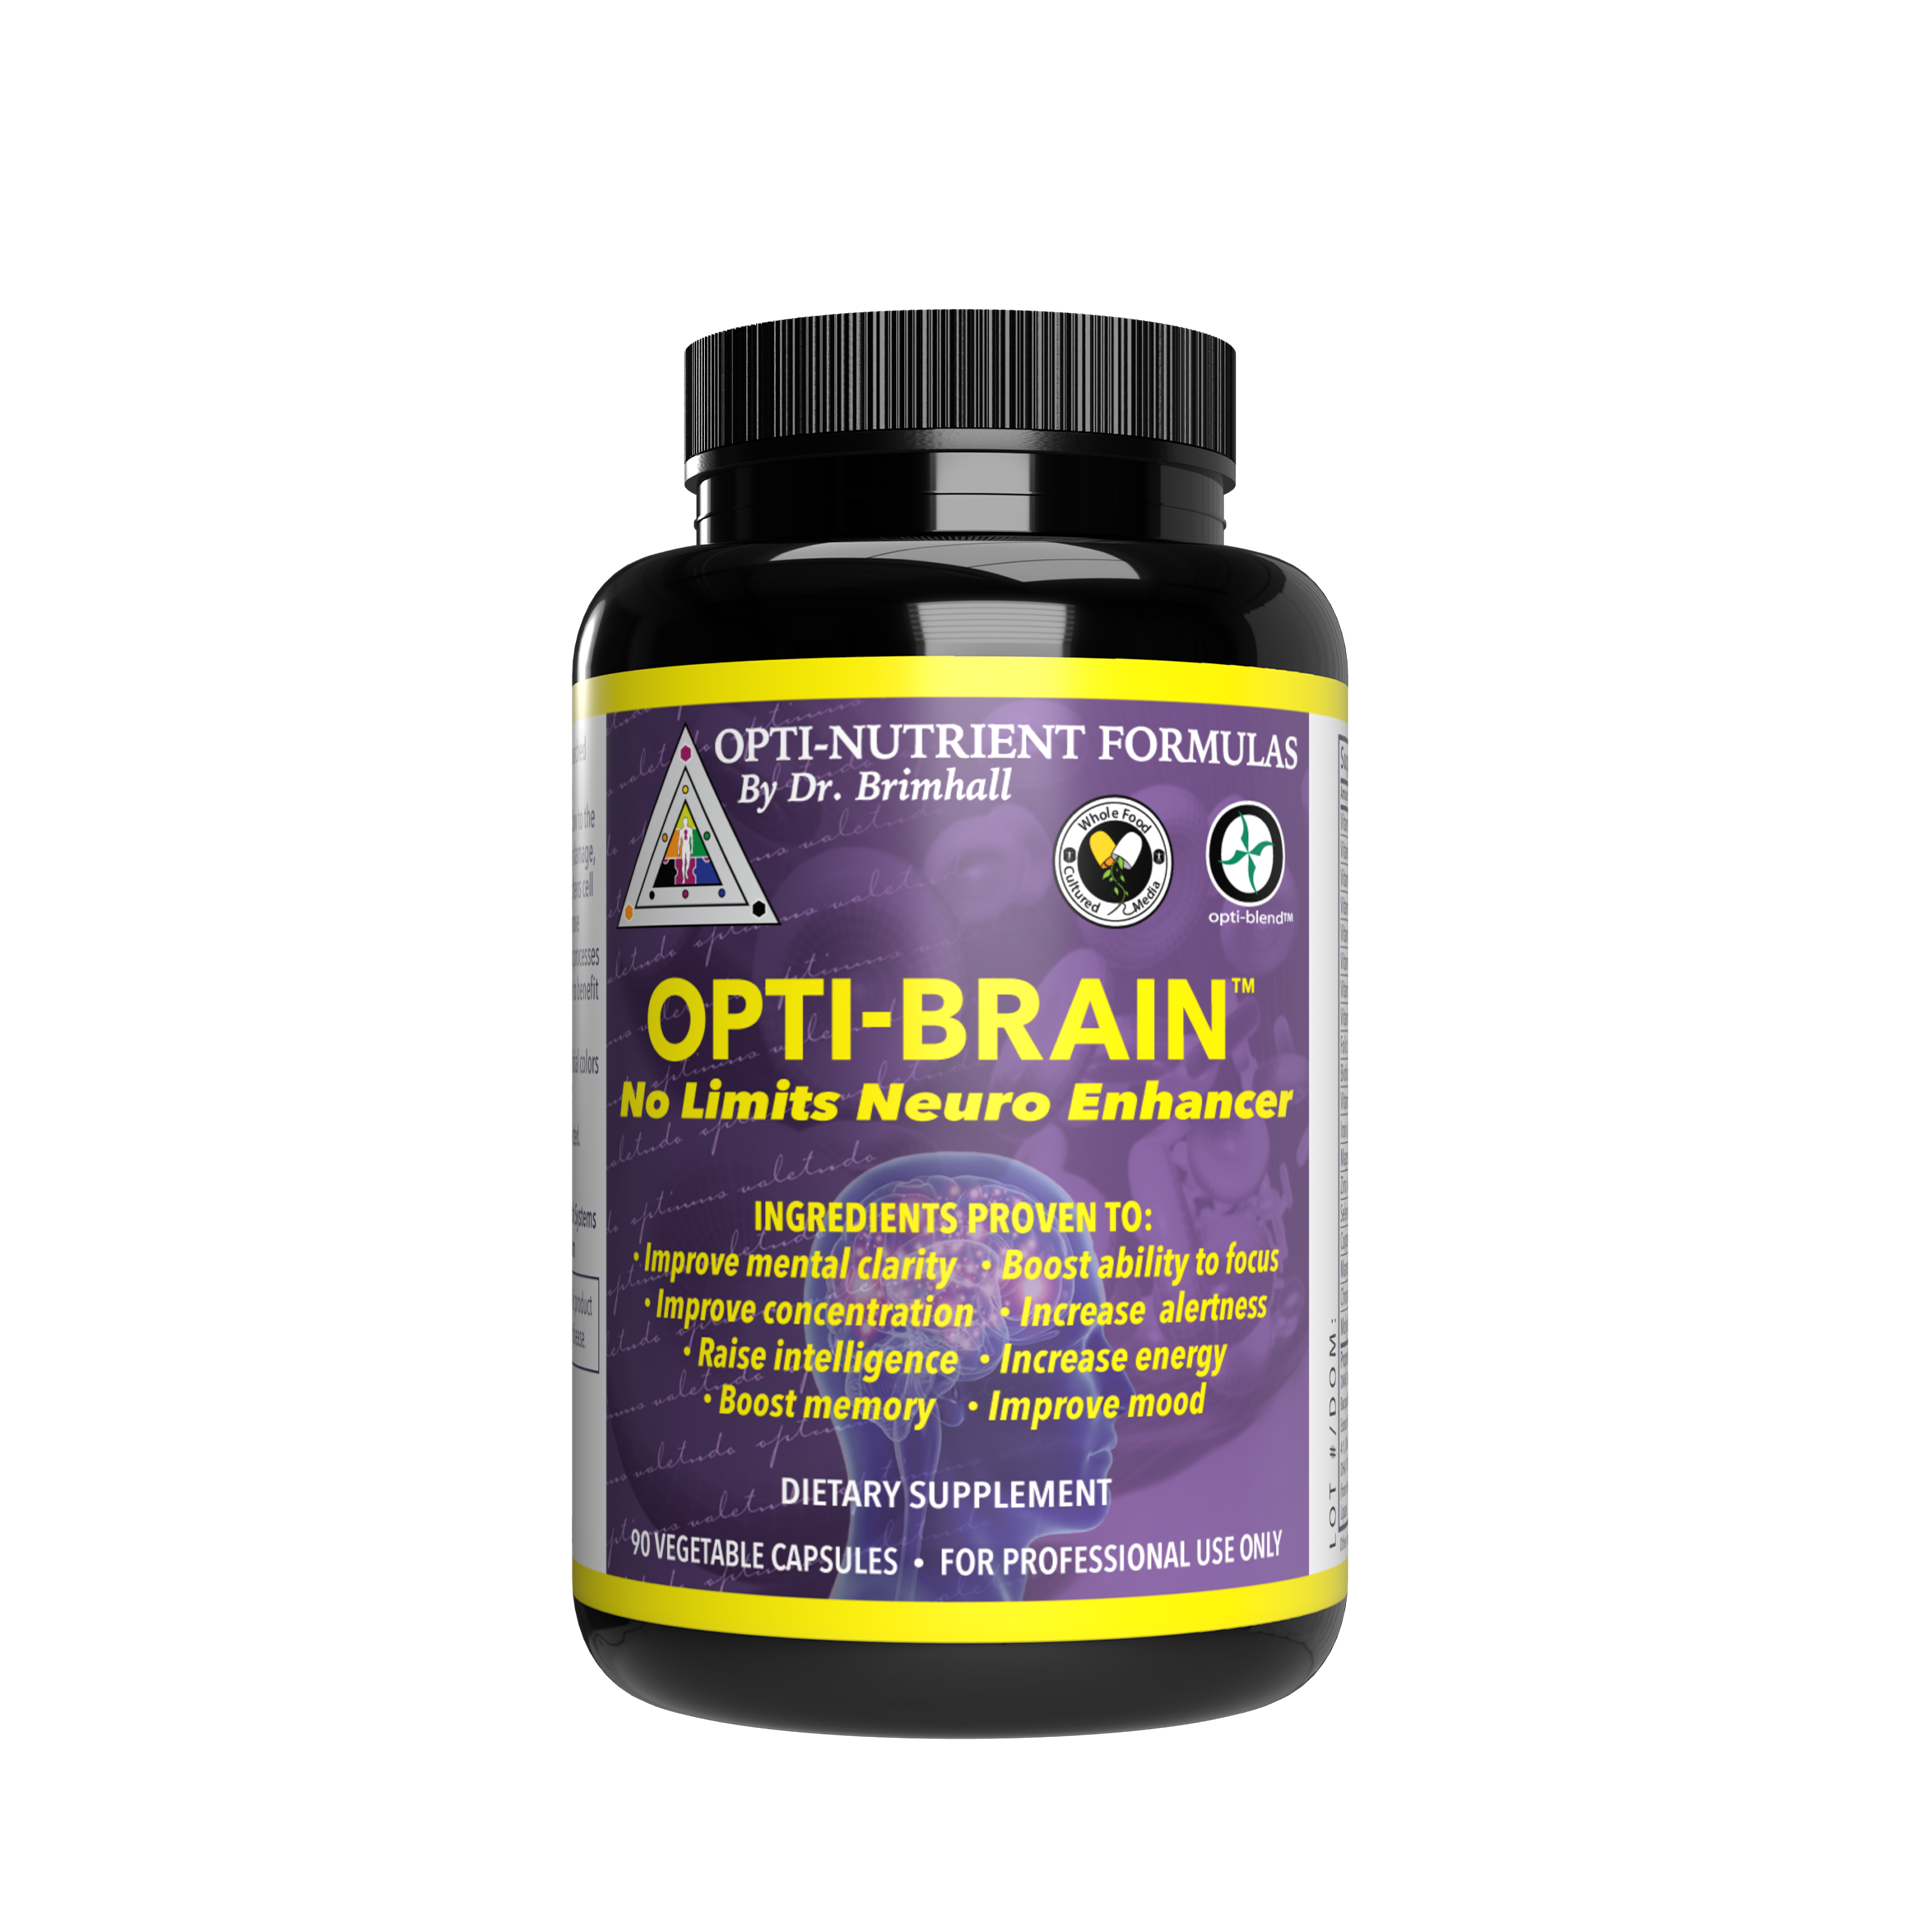 Image of a bottle of Opti-Nutrients Opti-Brain.